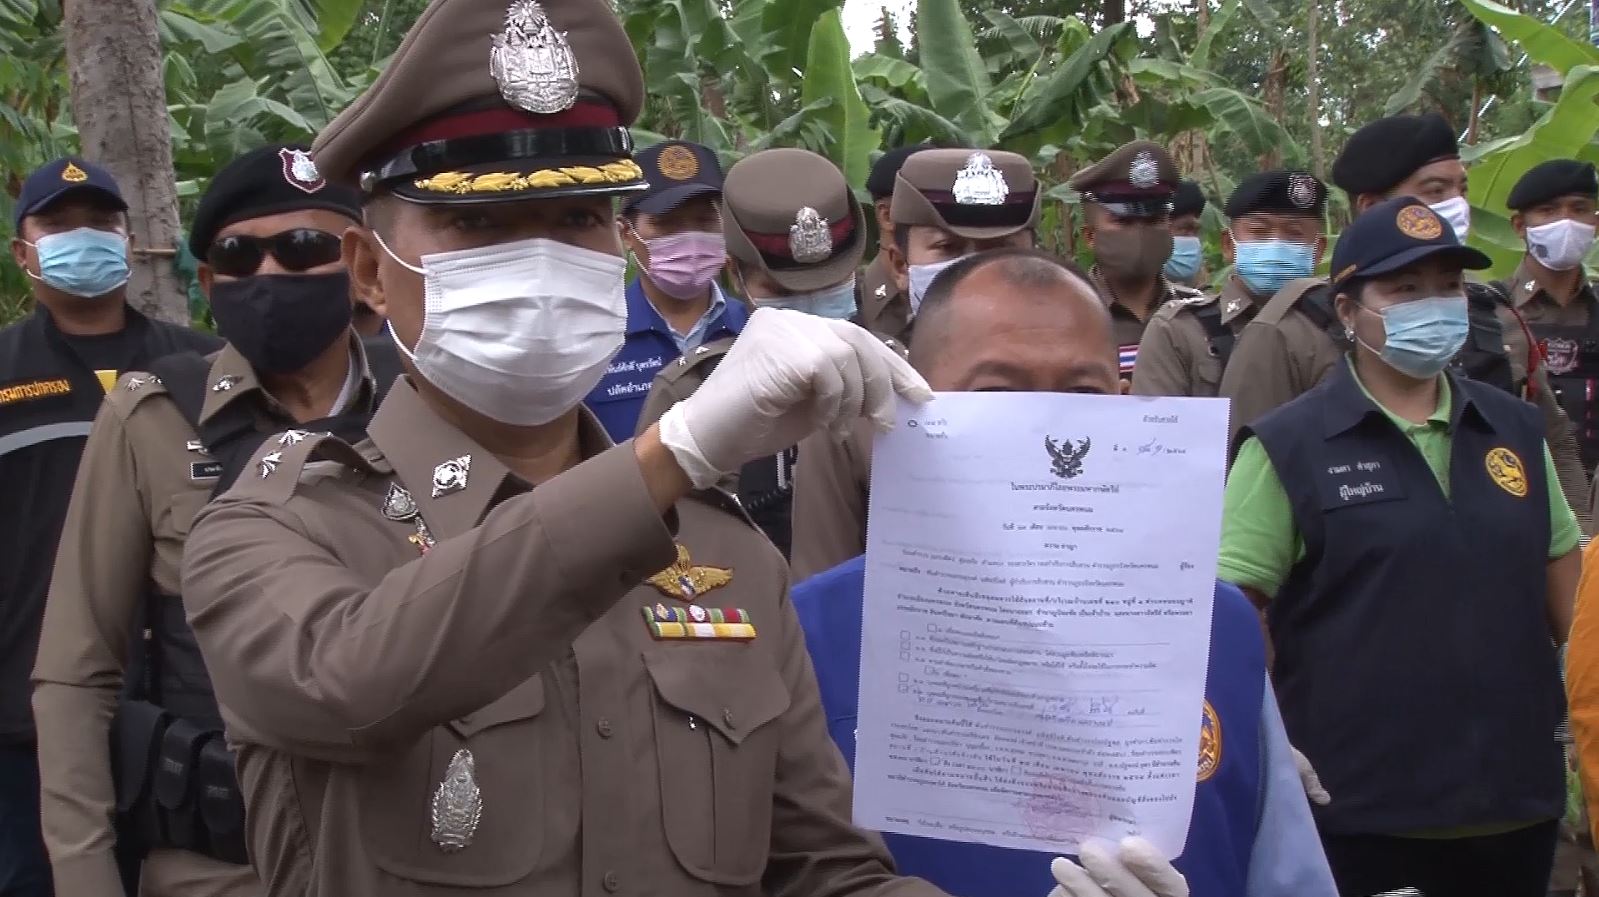 Thai “Nun” Allegedly Ran ~$320K Scam That Affected 400 People, Gets Arrested For Fraud 